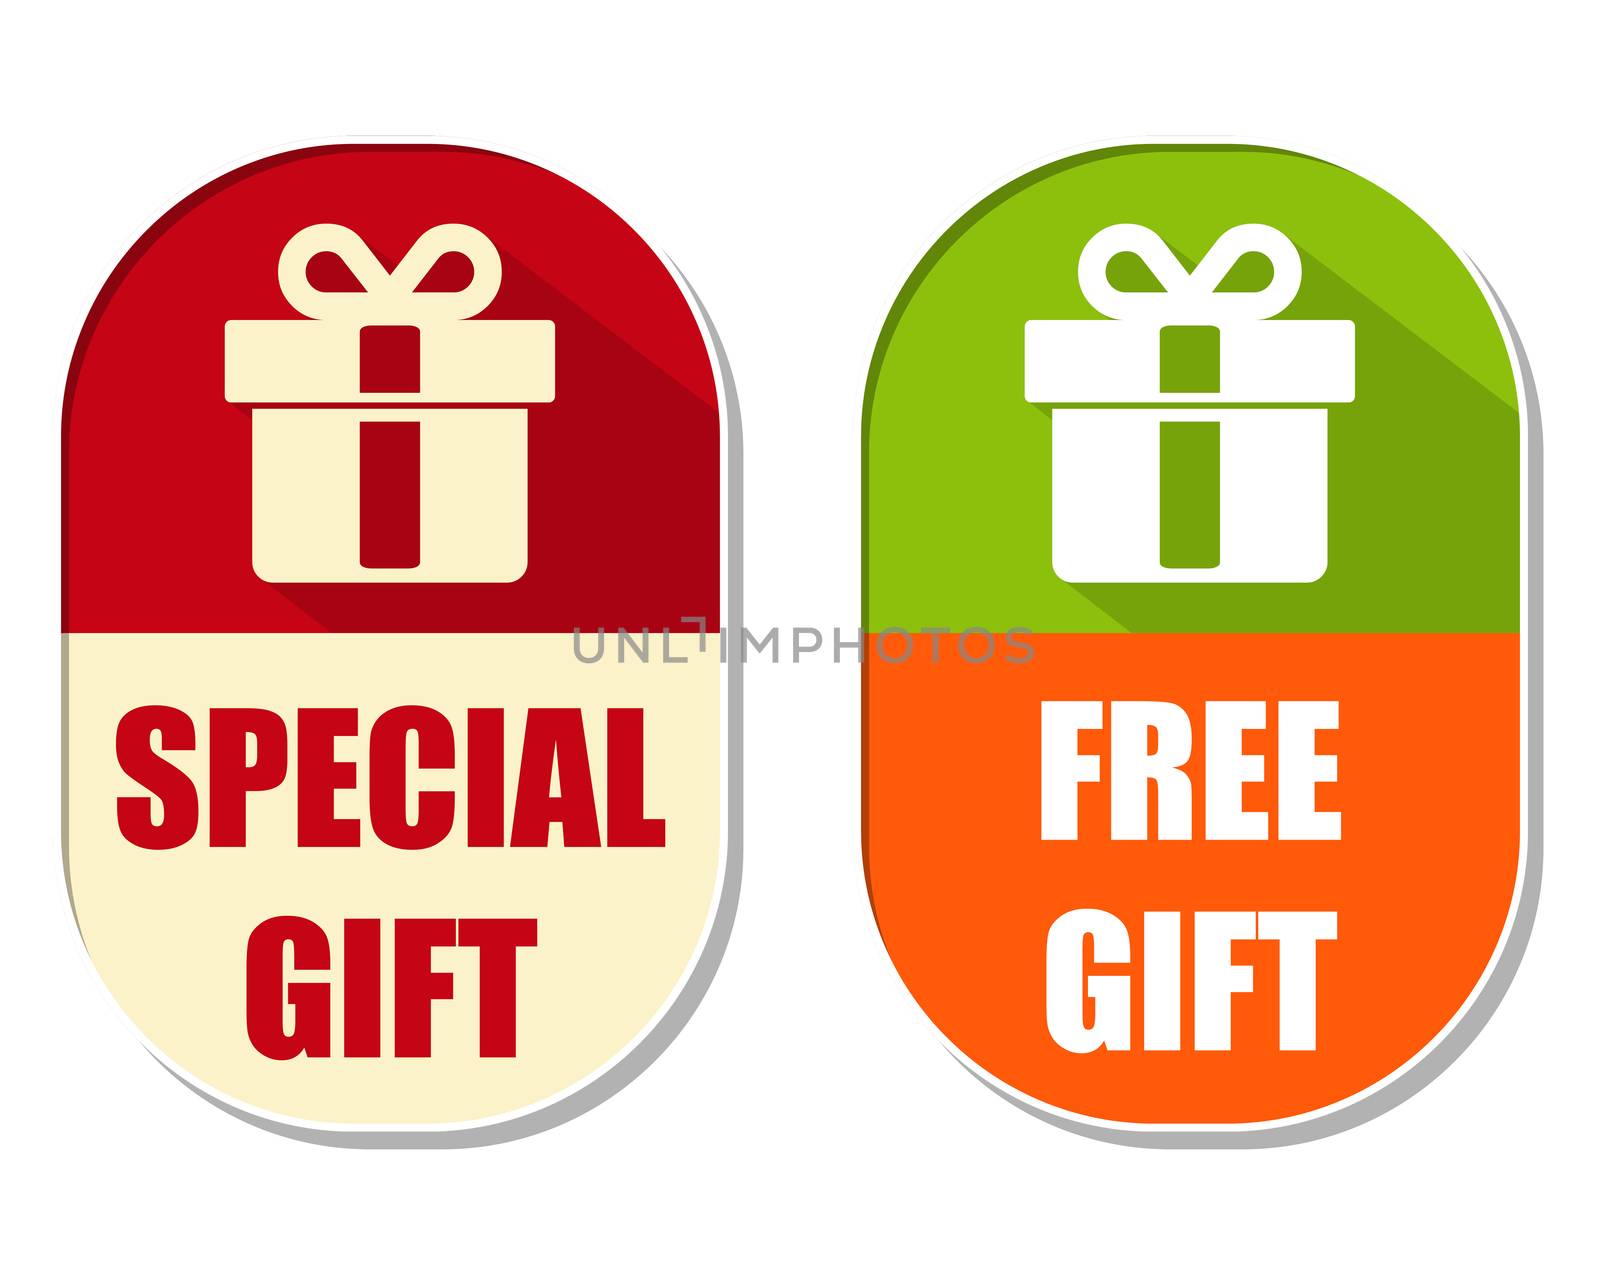 special and free gift with present box symbol, two elliptic flat design labels with icons, business holiday concept